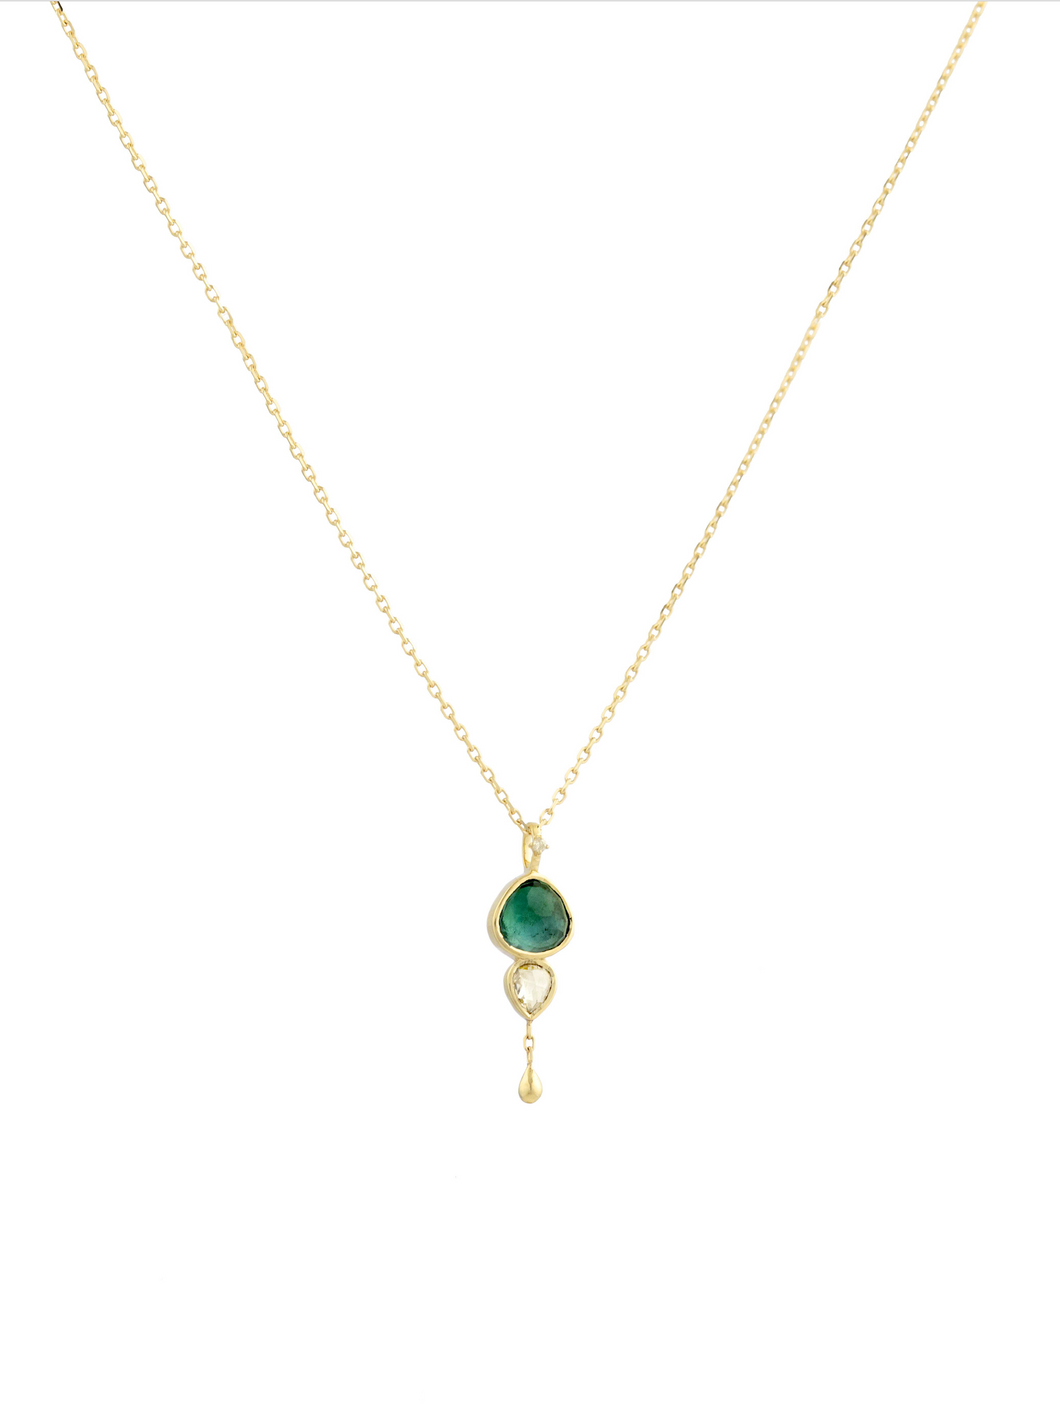 Celine Daoust One of a Kind Green Tourmaline Necklace